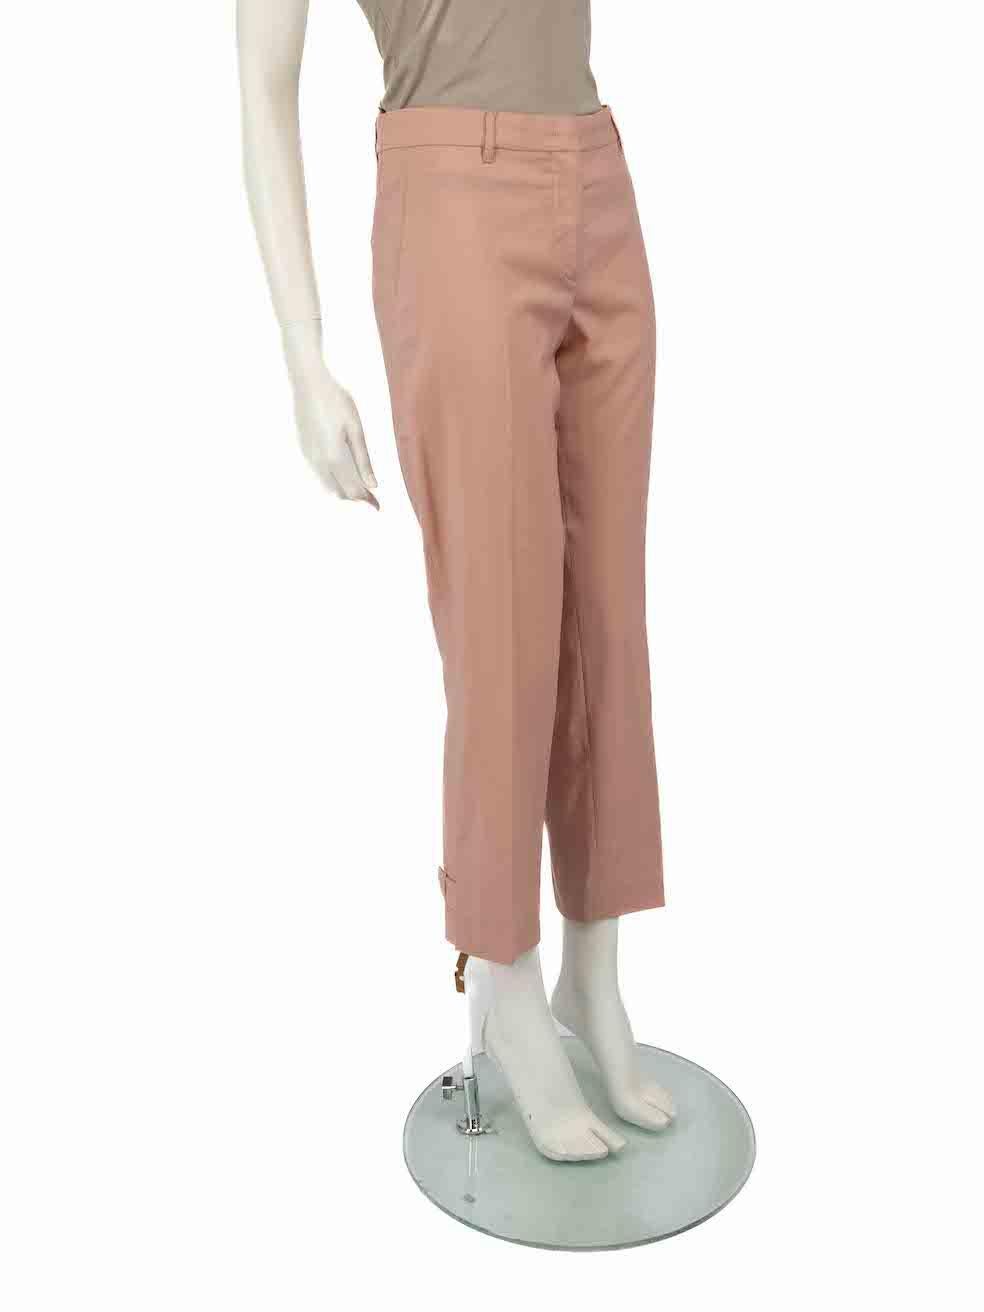 CONDITION is Very good. Minimal wear to trouser is evident. Minimal wear to the inside bottom hem on both legs where some small plucks can be seen on this used Miu Miu designer resale item.
 
 
 
 Details
 
 
 Pink
 
 Wool
 
 Straight leg trousers
